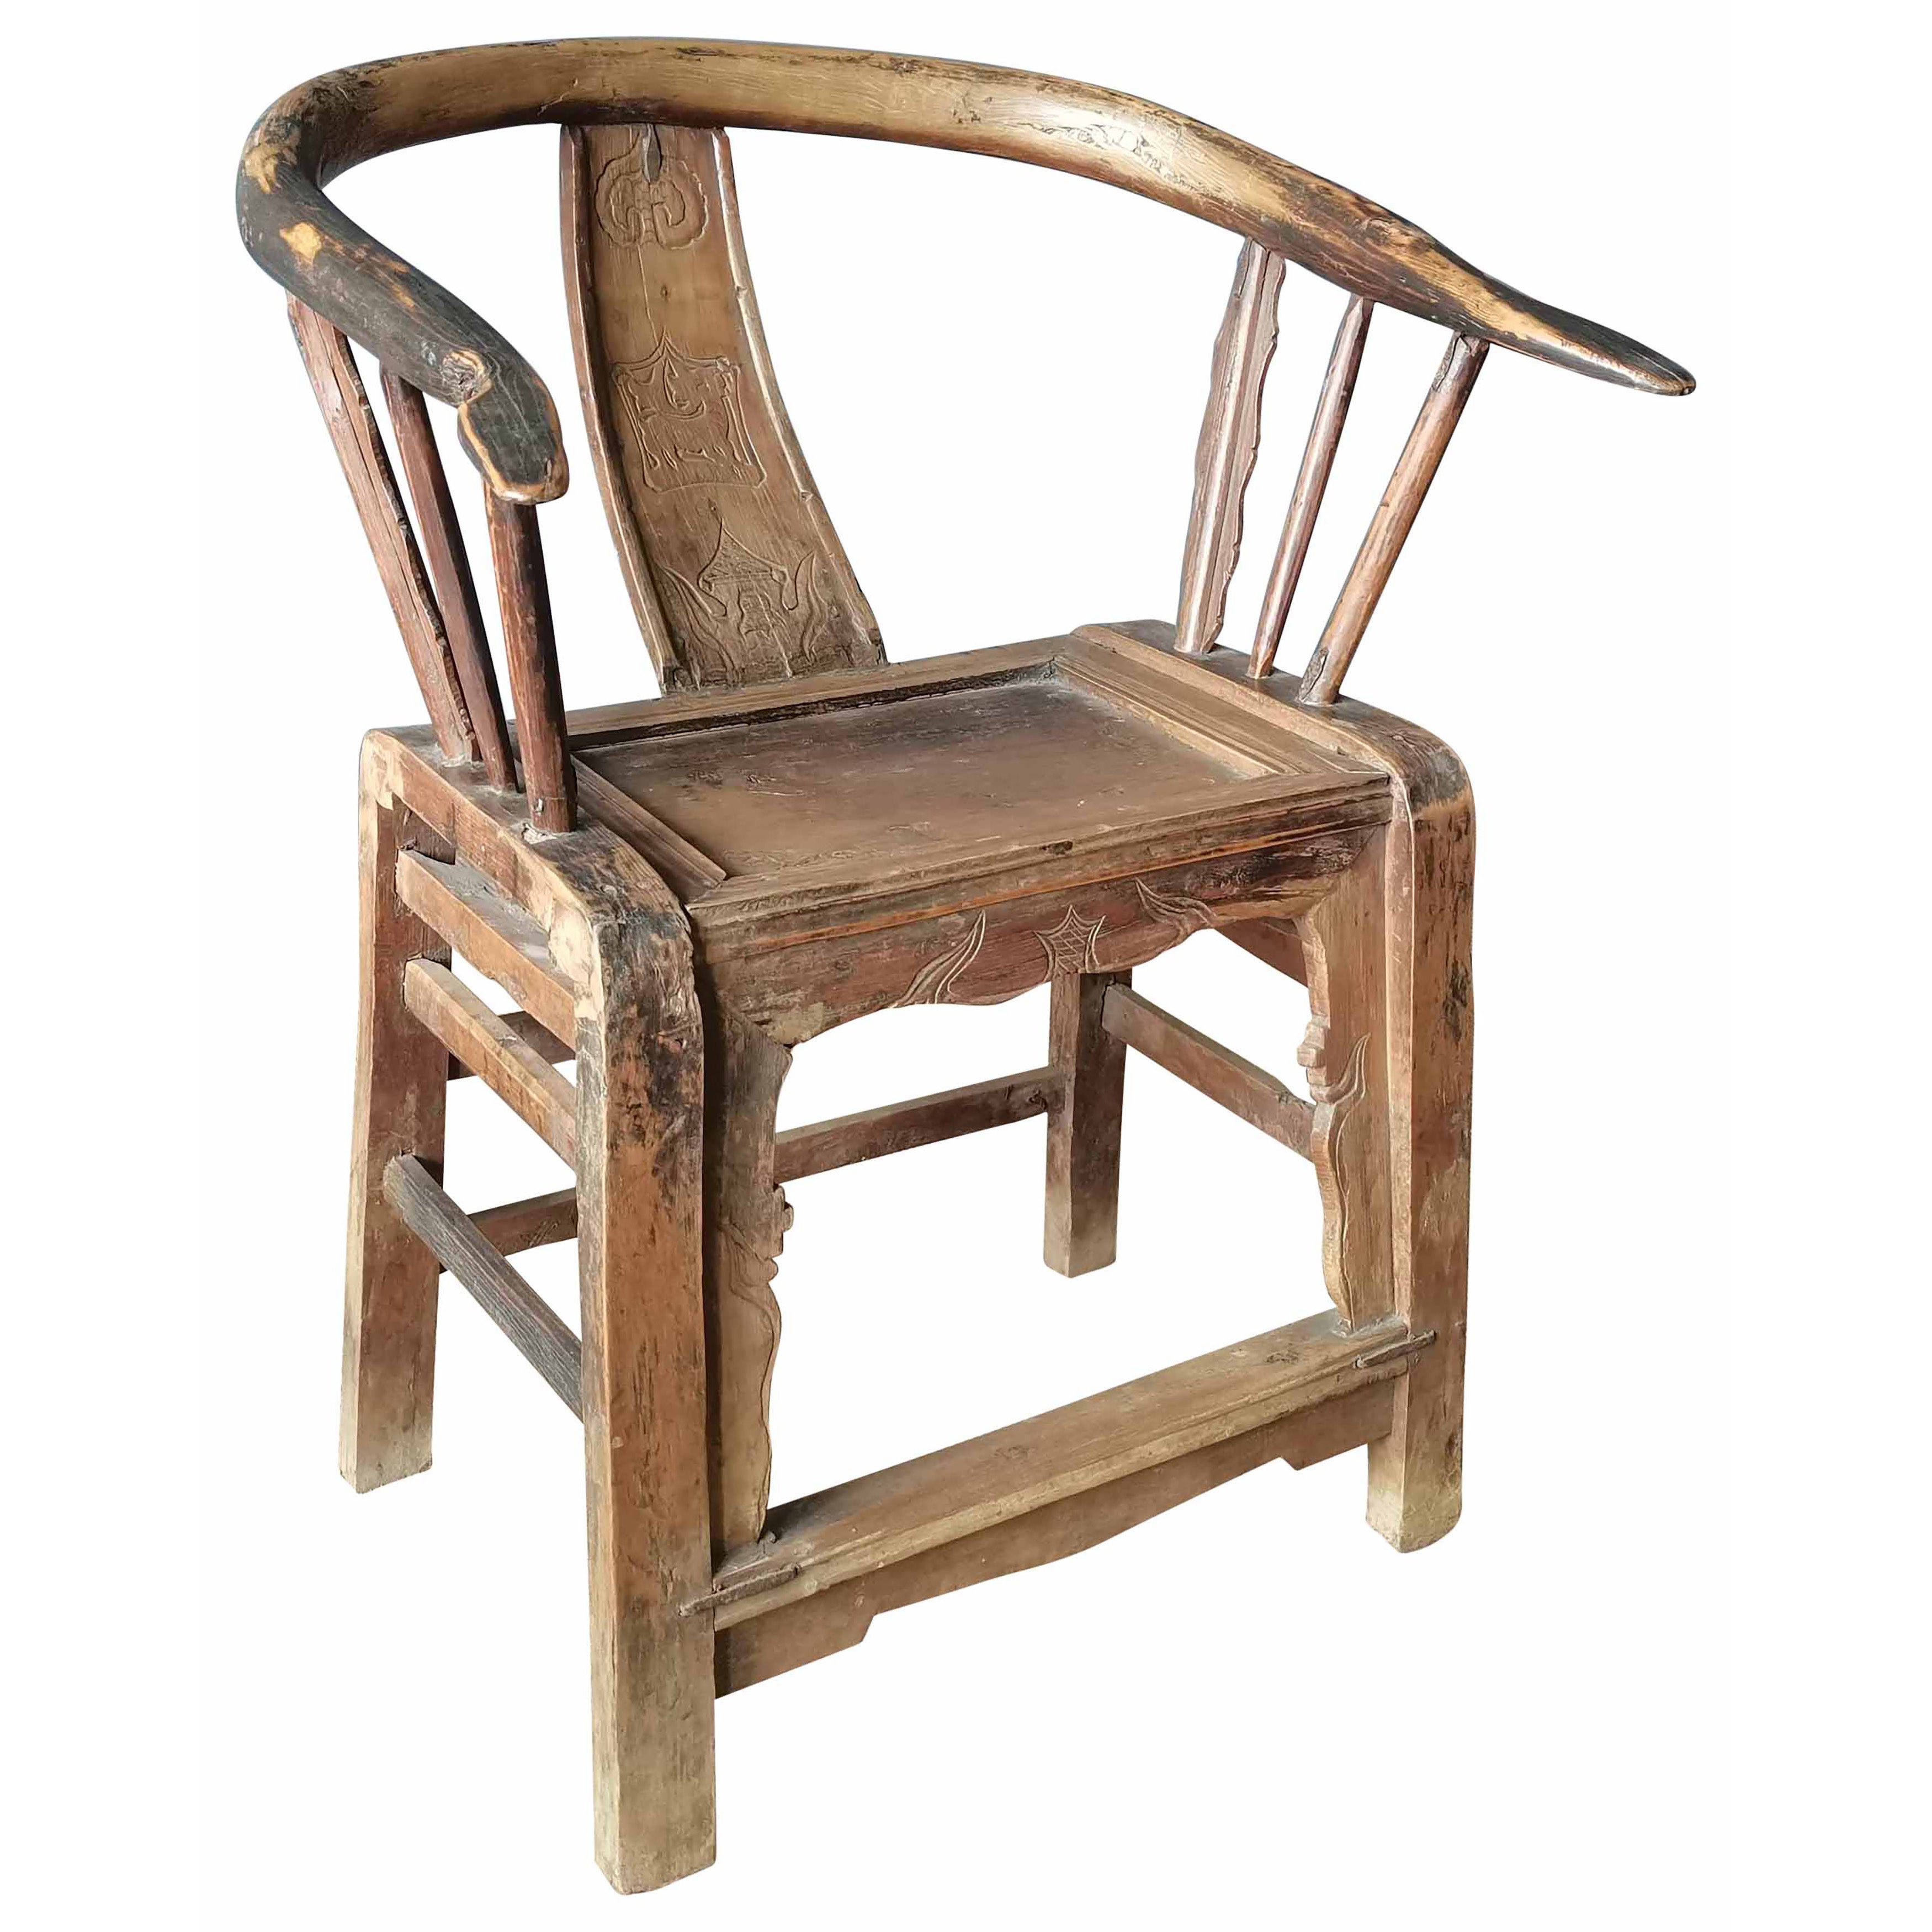 Antique Chinese Dining Chair - What A Room